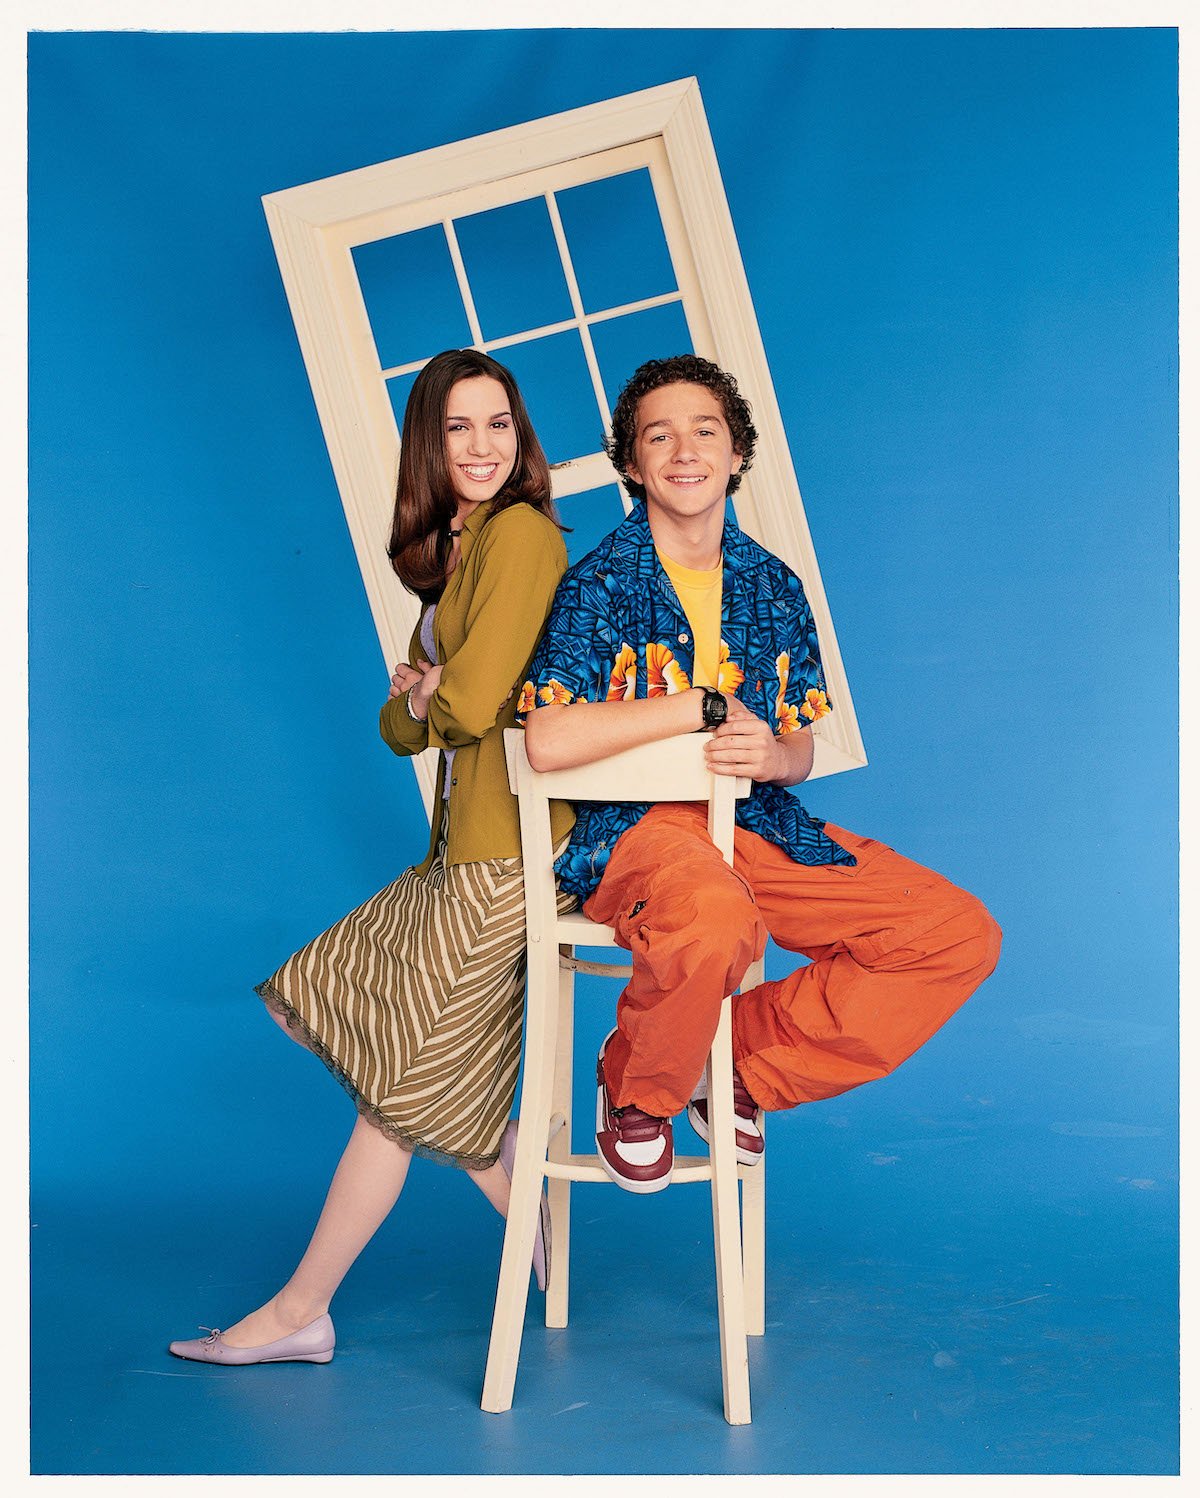 Christy Carlson Romano and Shia LeBeouf in promotional shot